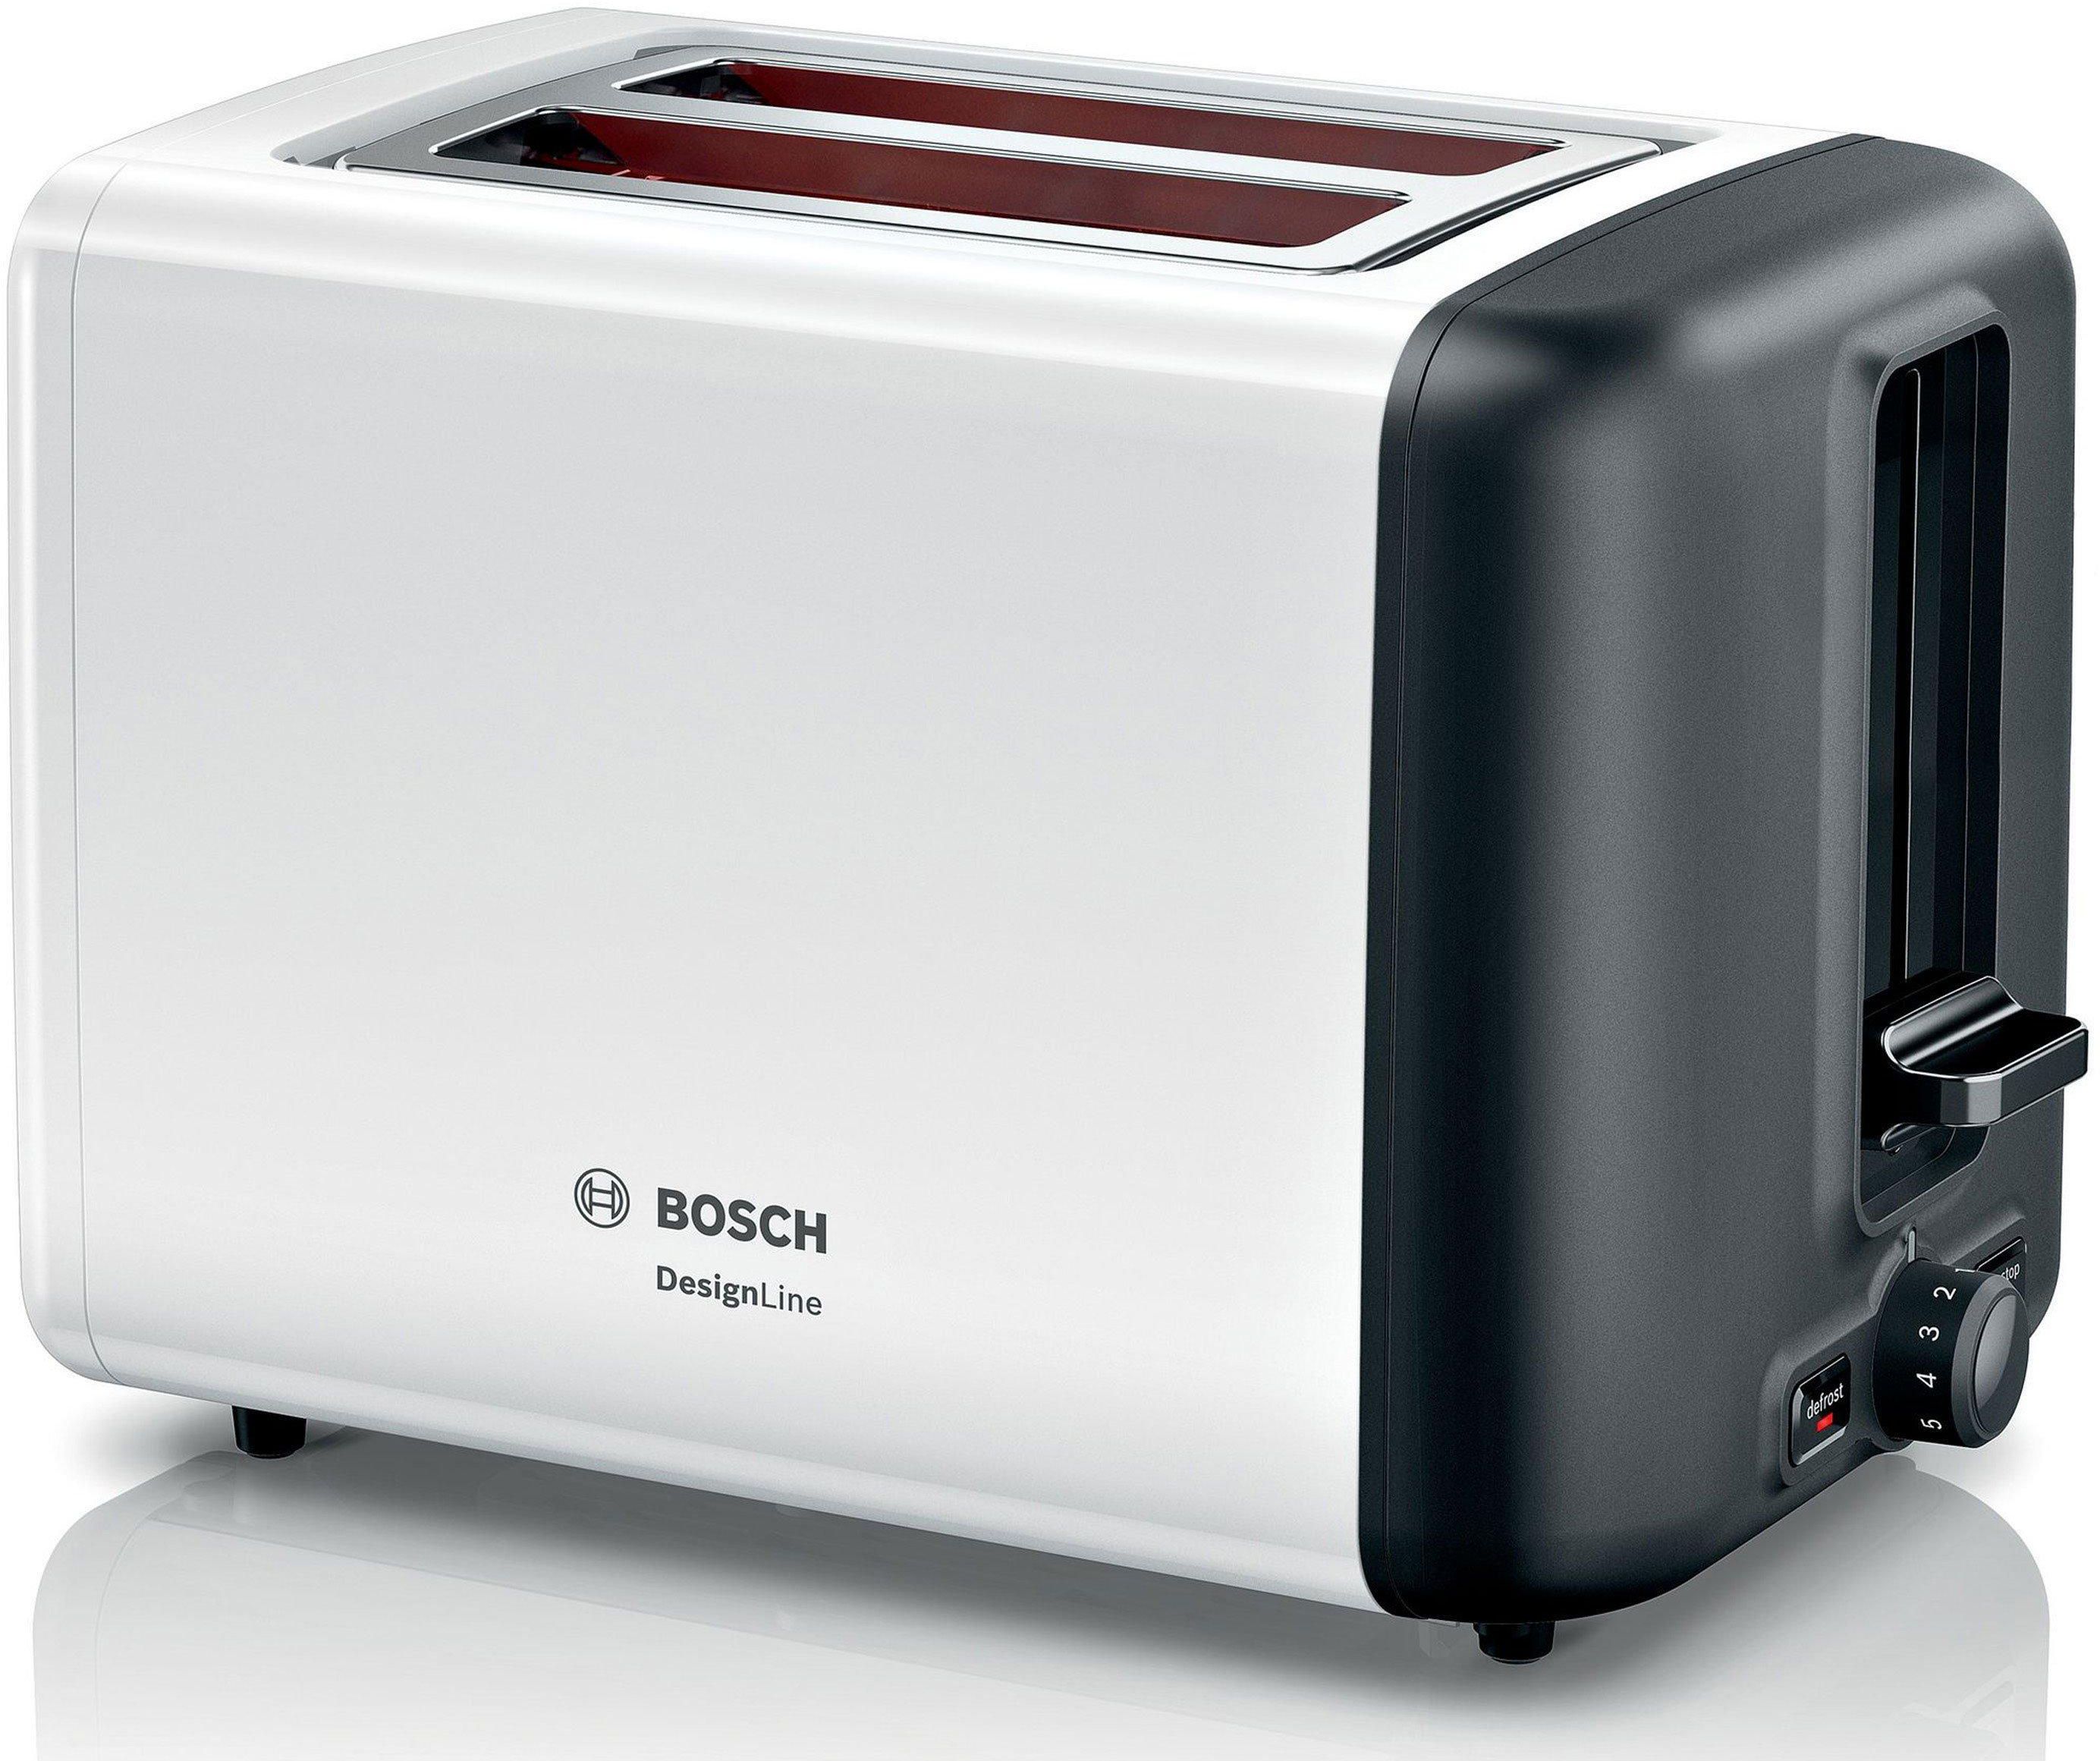 Bosch Compact Toaster with warming rack, 820-970W, Two slices, White Stainless Steel